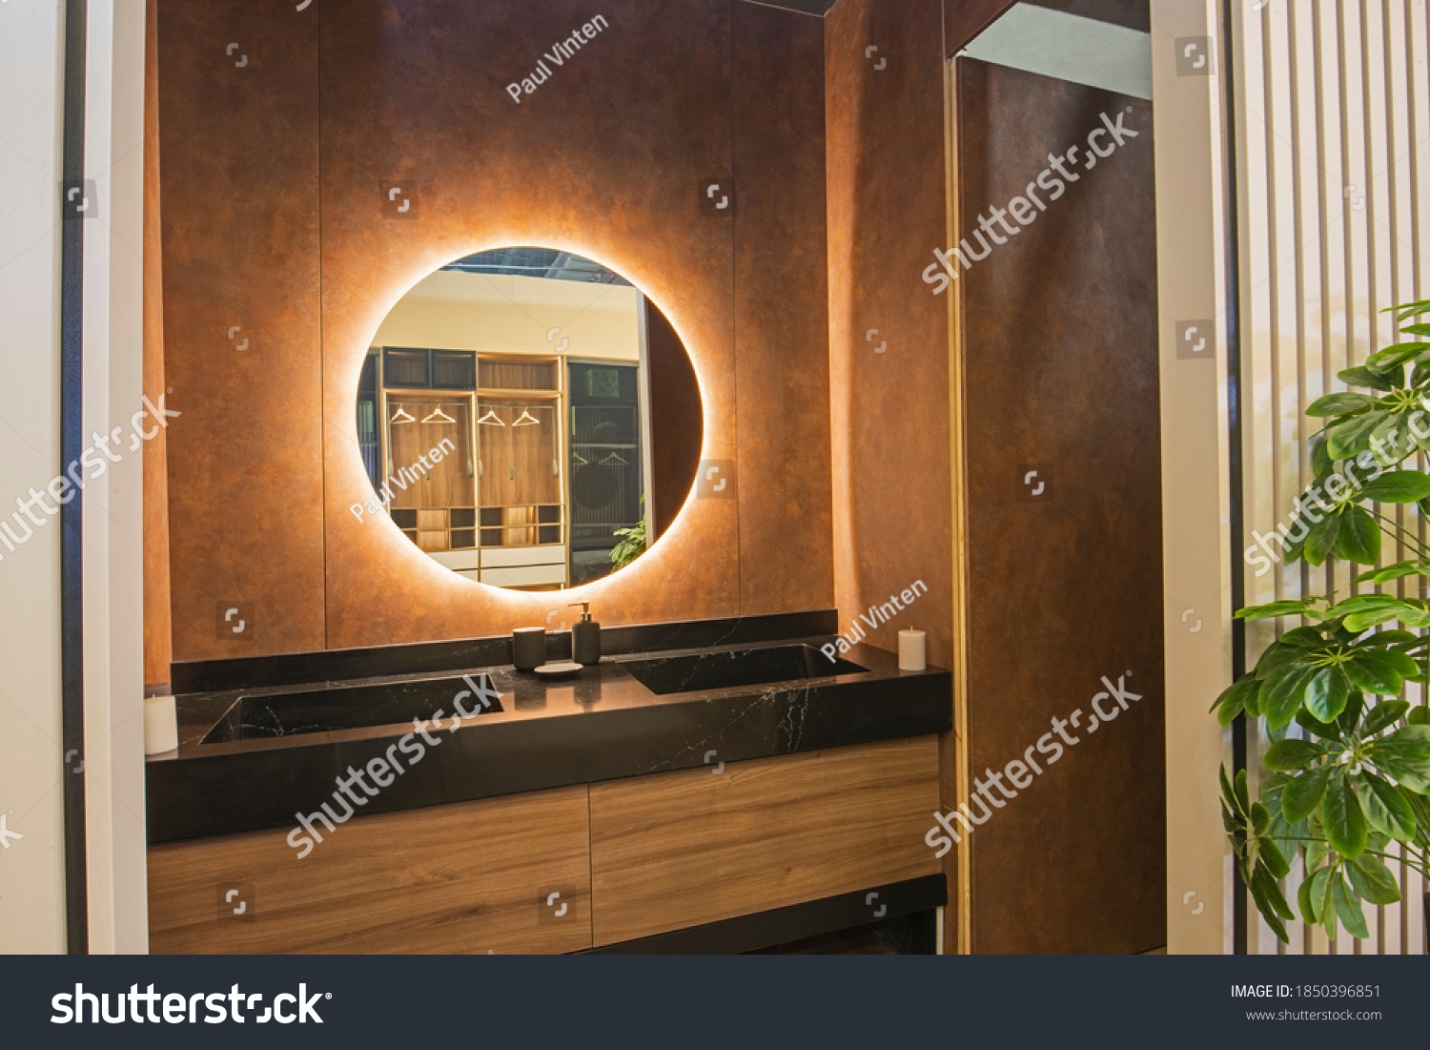 stock-photo-interior-design-of-a-luxury-show-home-bathroom-with-twin-sinks-and-round-mirror-1850396851.jpg